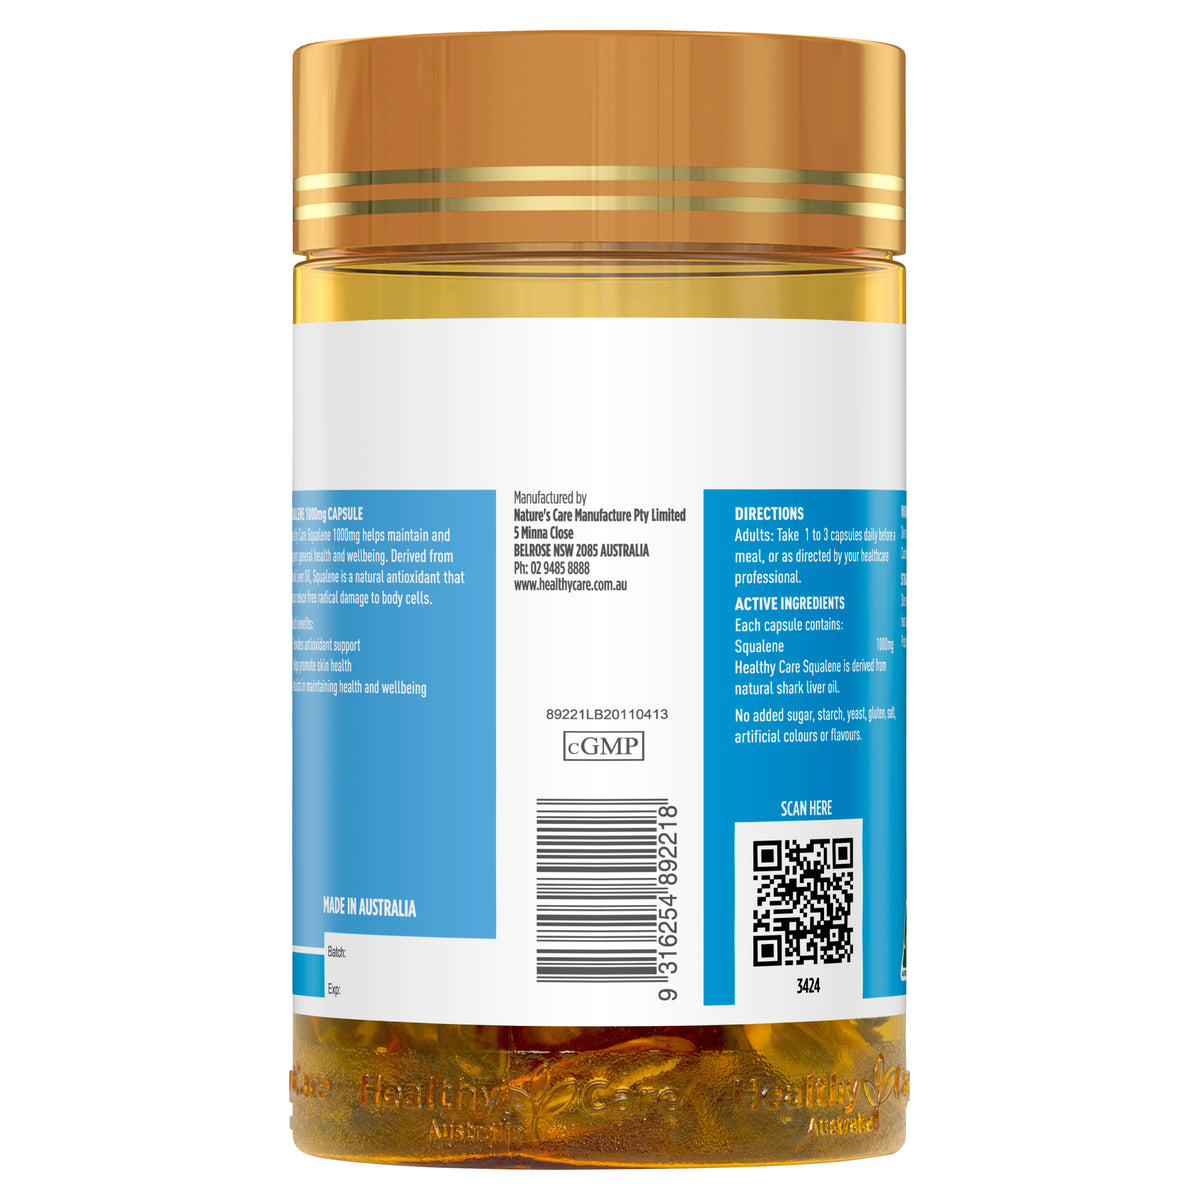 Manufacturer and Barcode of Squalene 1000mg 200 Capsules-Vitamins & Supplements-Healthy Care Australia